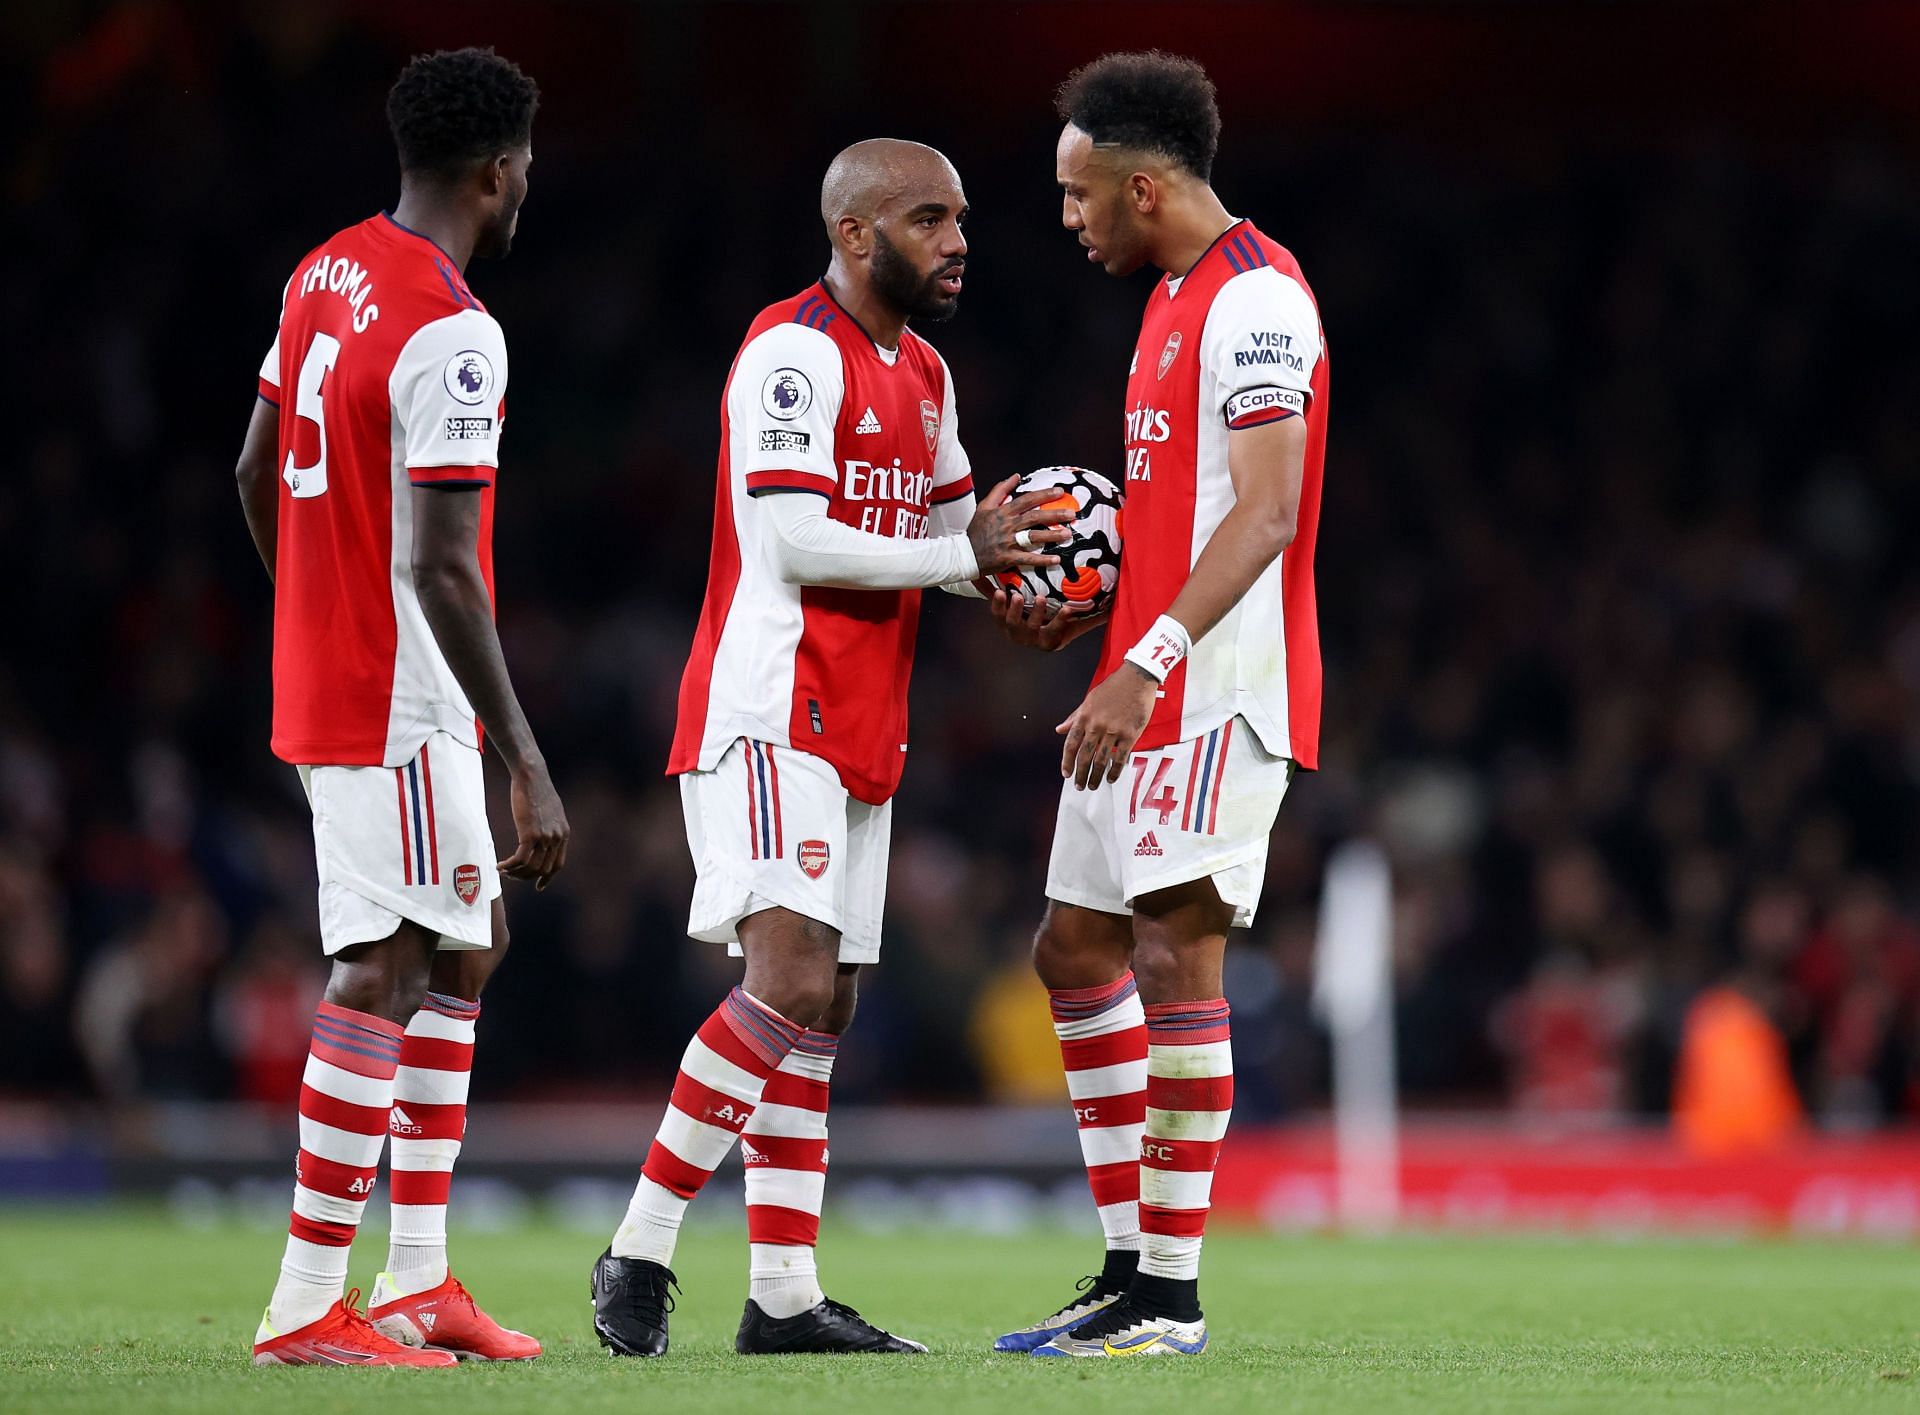 Arsenal are hopeful of a top-four finish in the Premier League this season